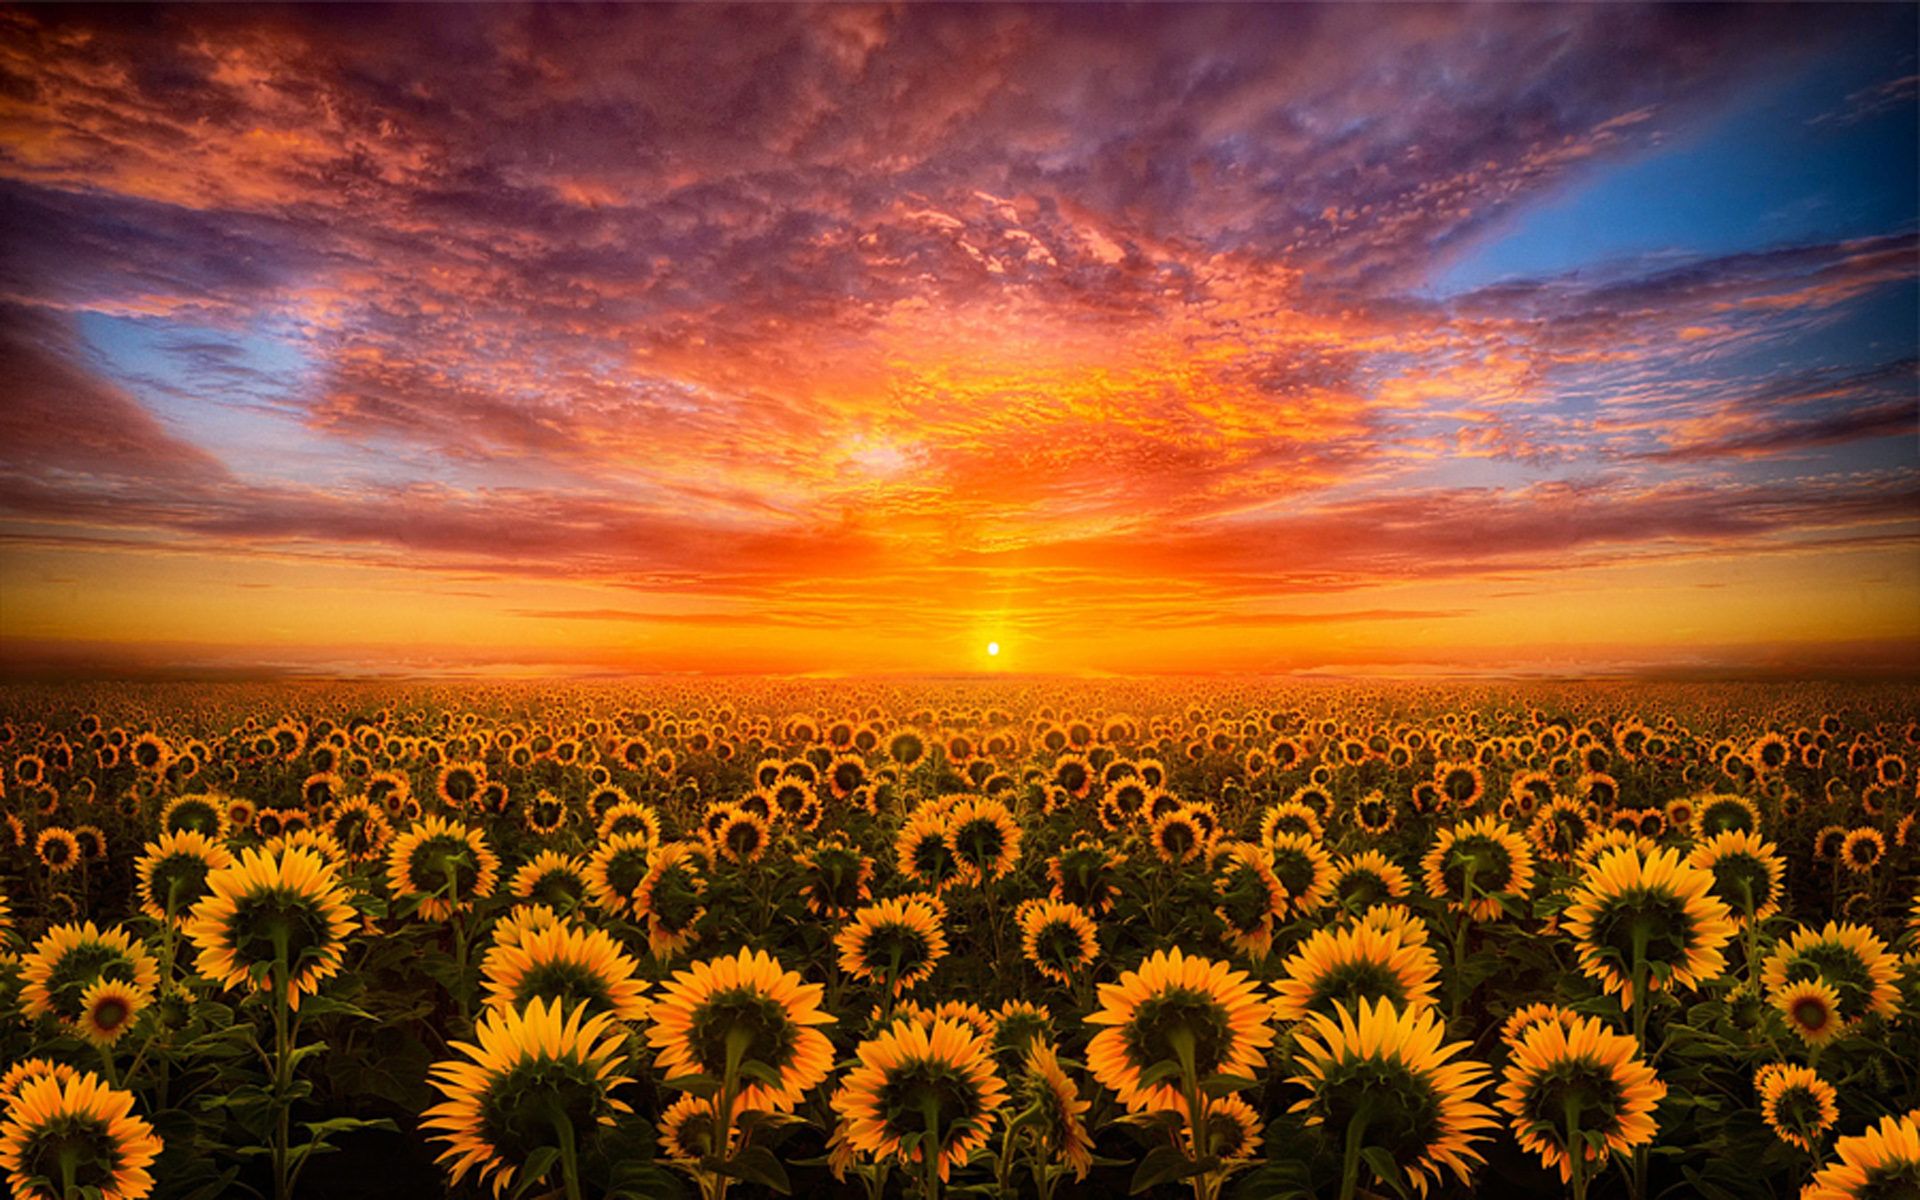 Sunflowers in a field at sunset - Sunset, sunflower